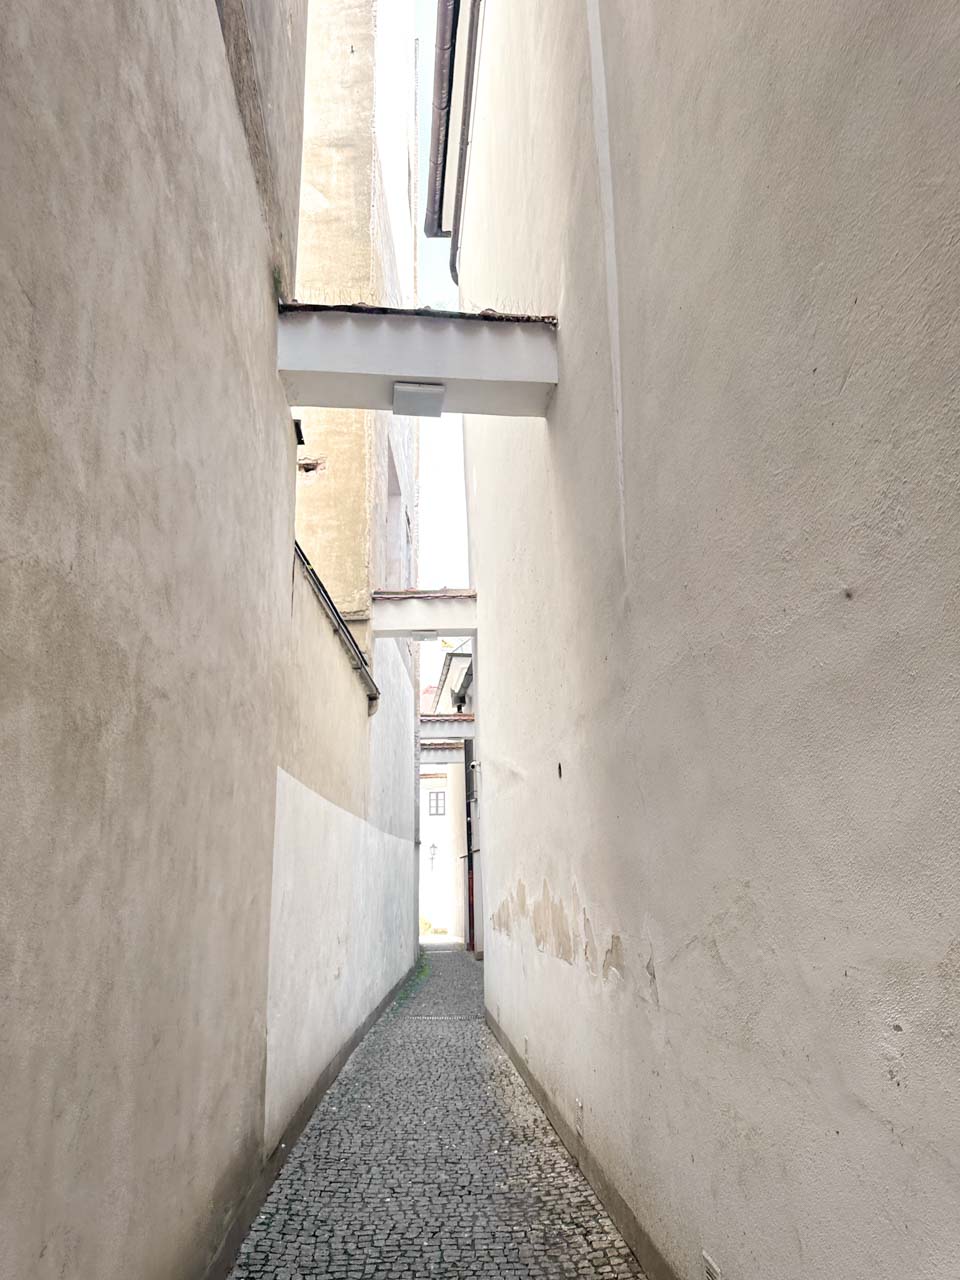 A narrow, cobbled alleyway lined by tall white walls in Brno, Czech Republic